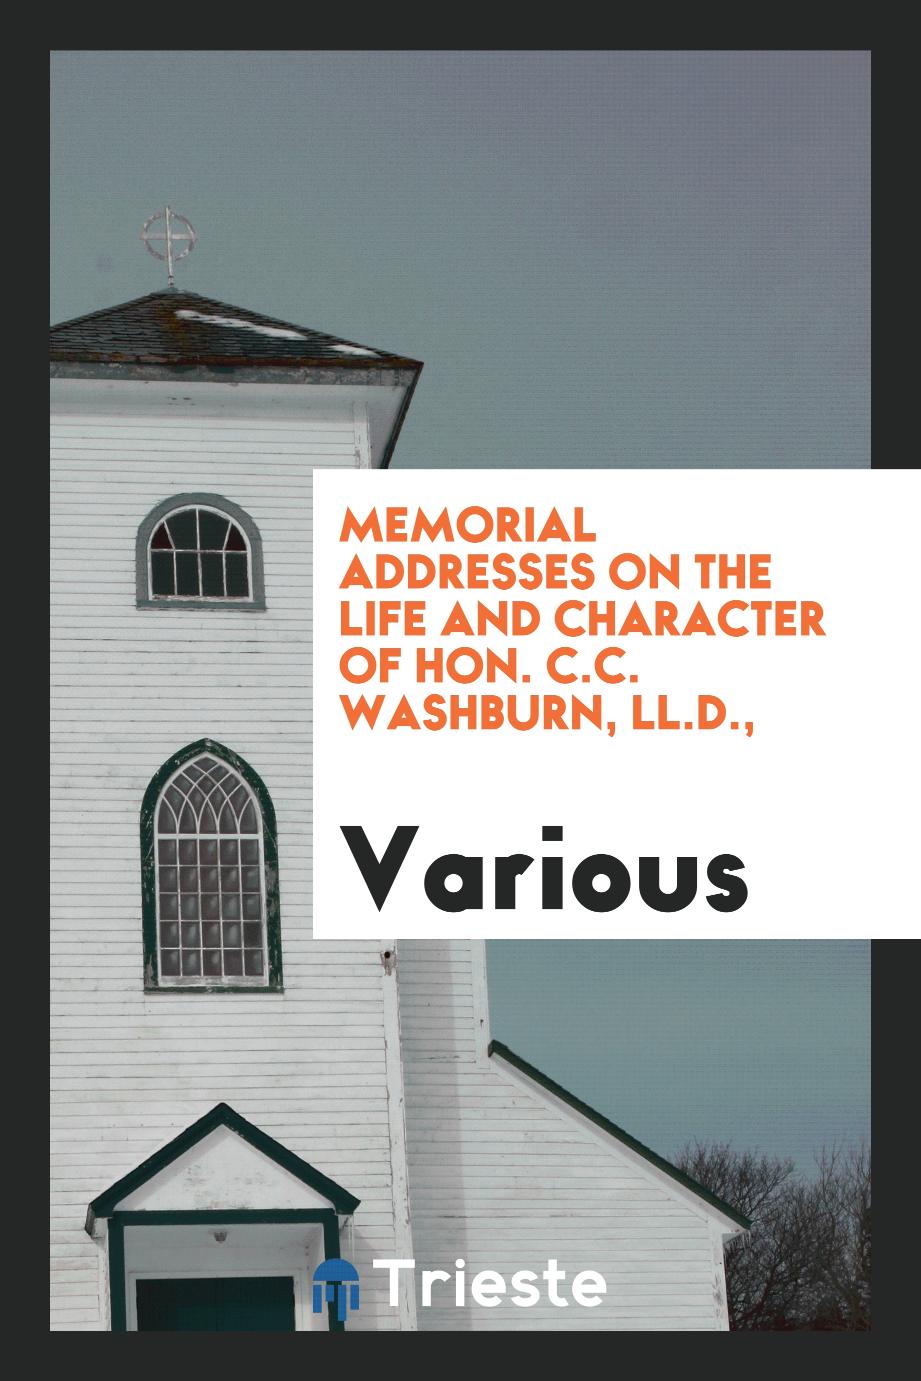 Memorial Addresses on the Life and Character of Hon. C.C. Washburn, LL.D.,